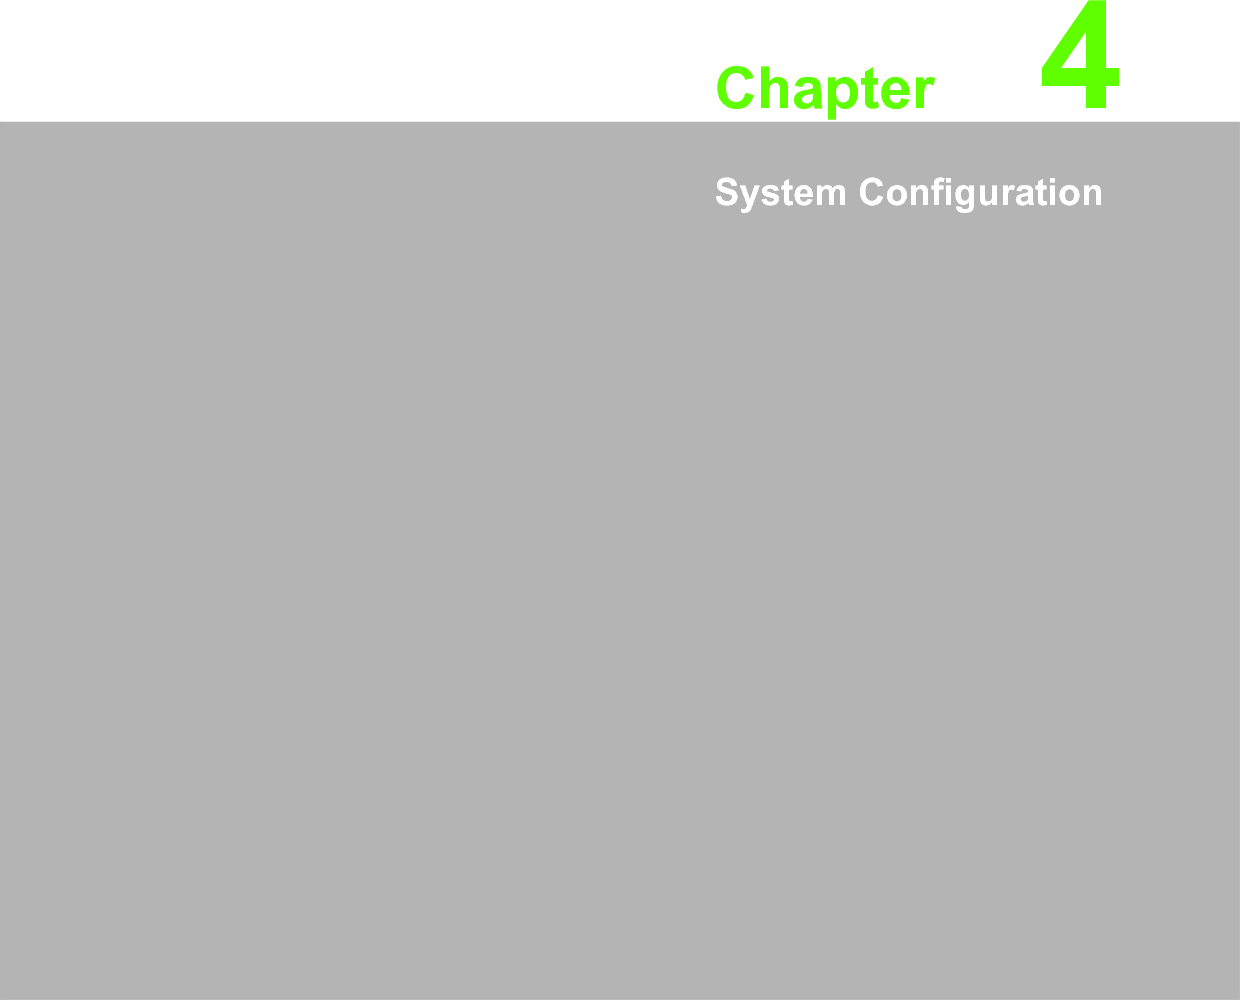 Chapter 44System Configuration